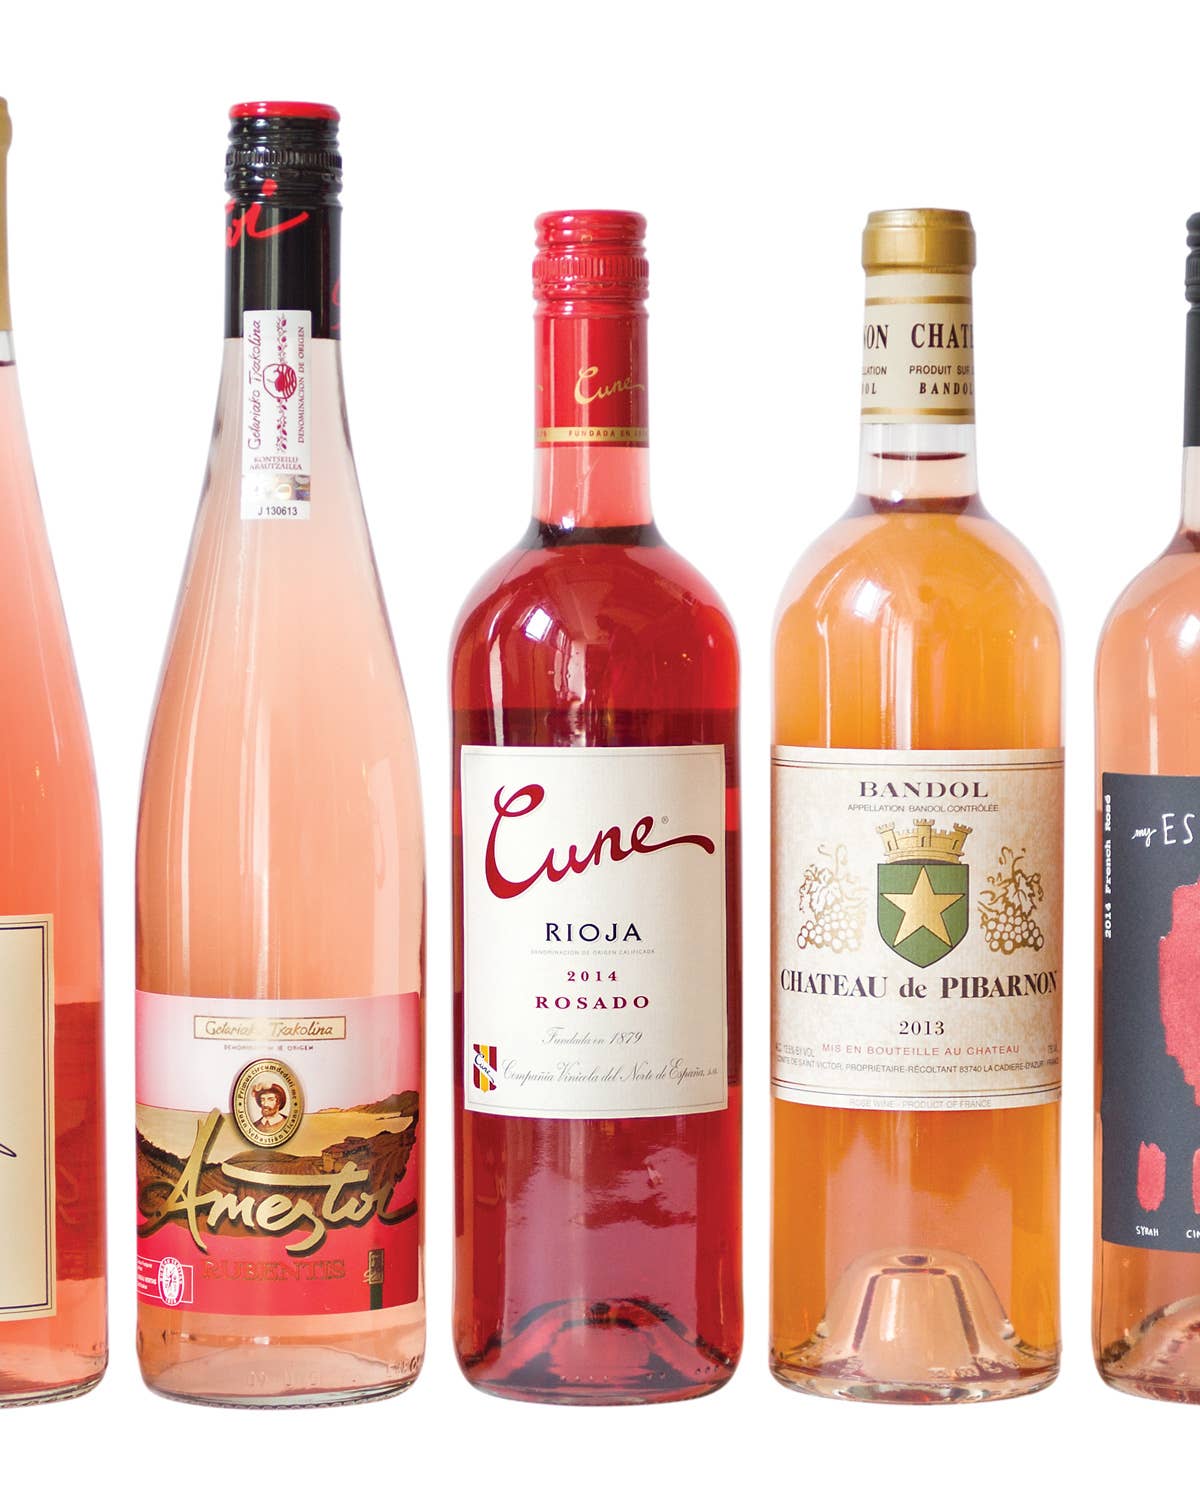 The Pair: The World of Rosé